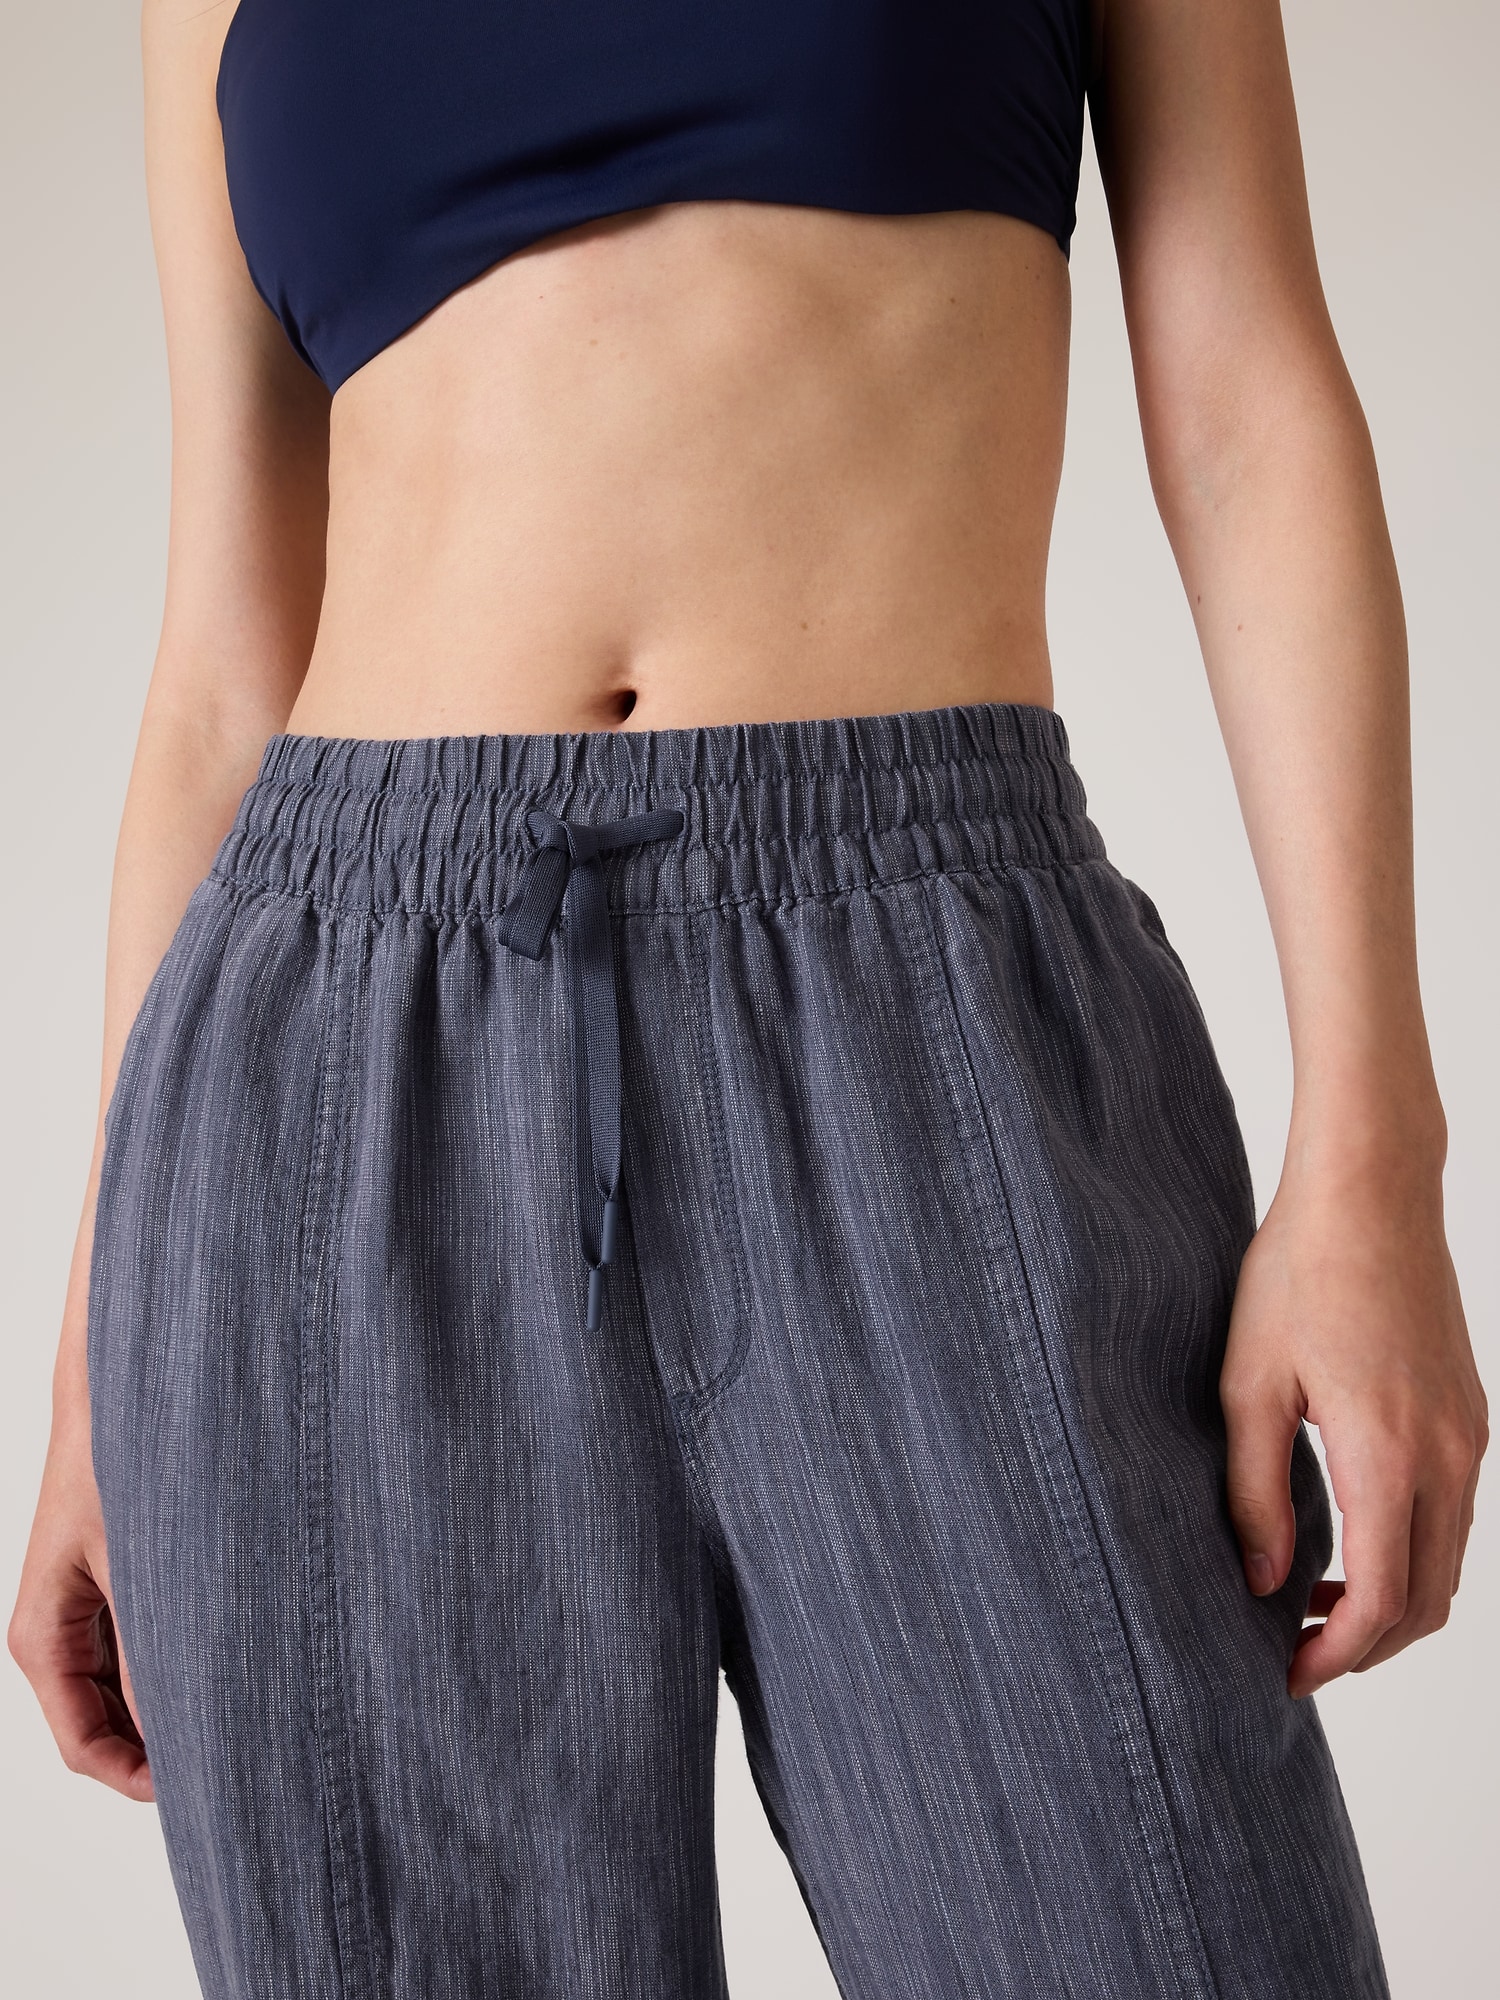 NWT Athleta Cosmic Pant XXS Navy #531089 Pull On Wide Waist Travel Relaxed  Fit n